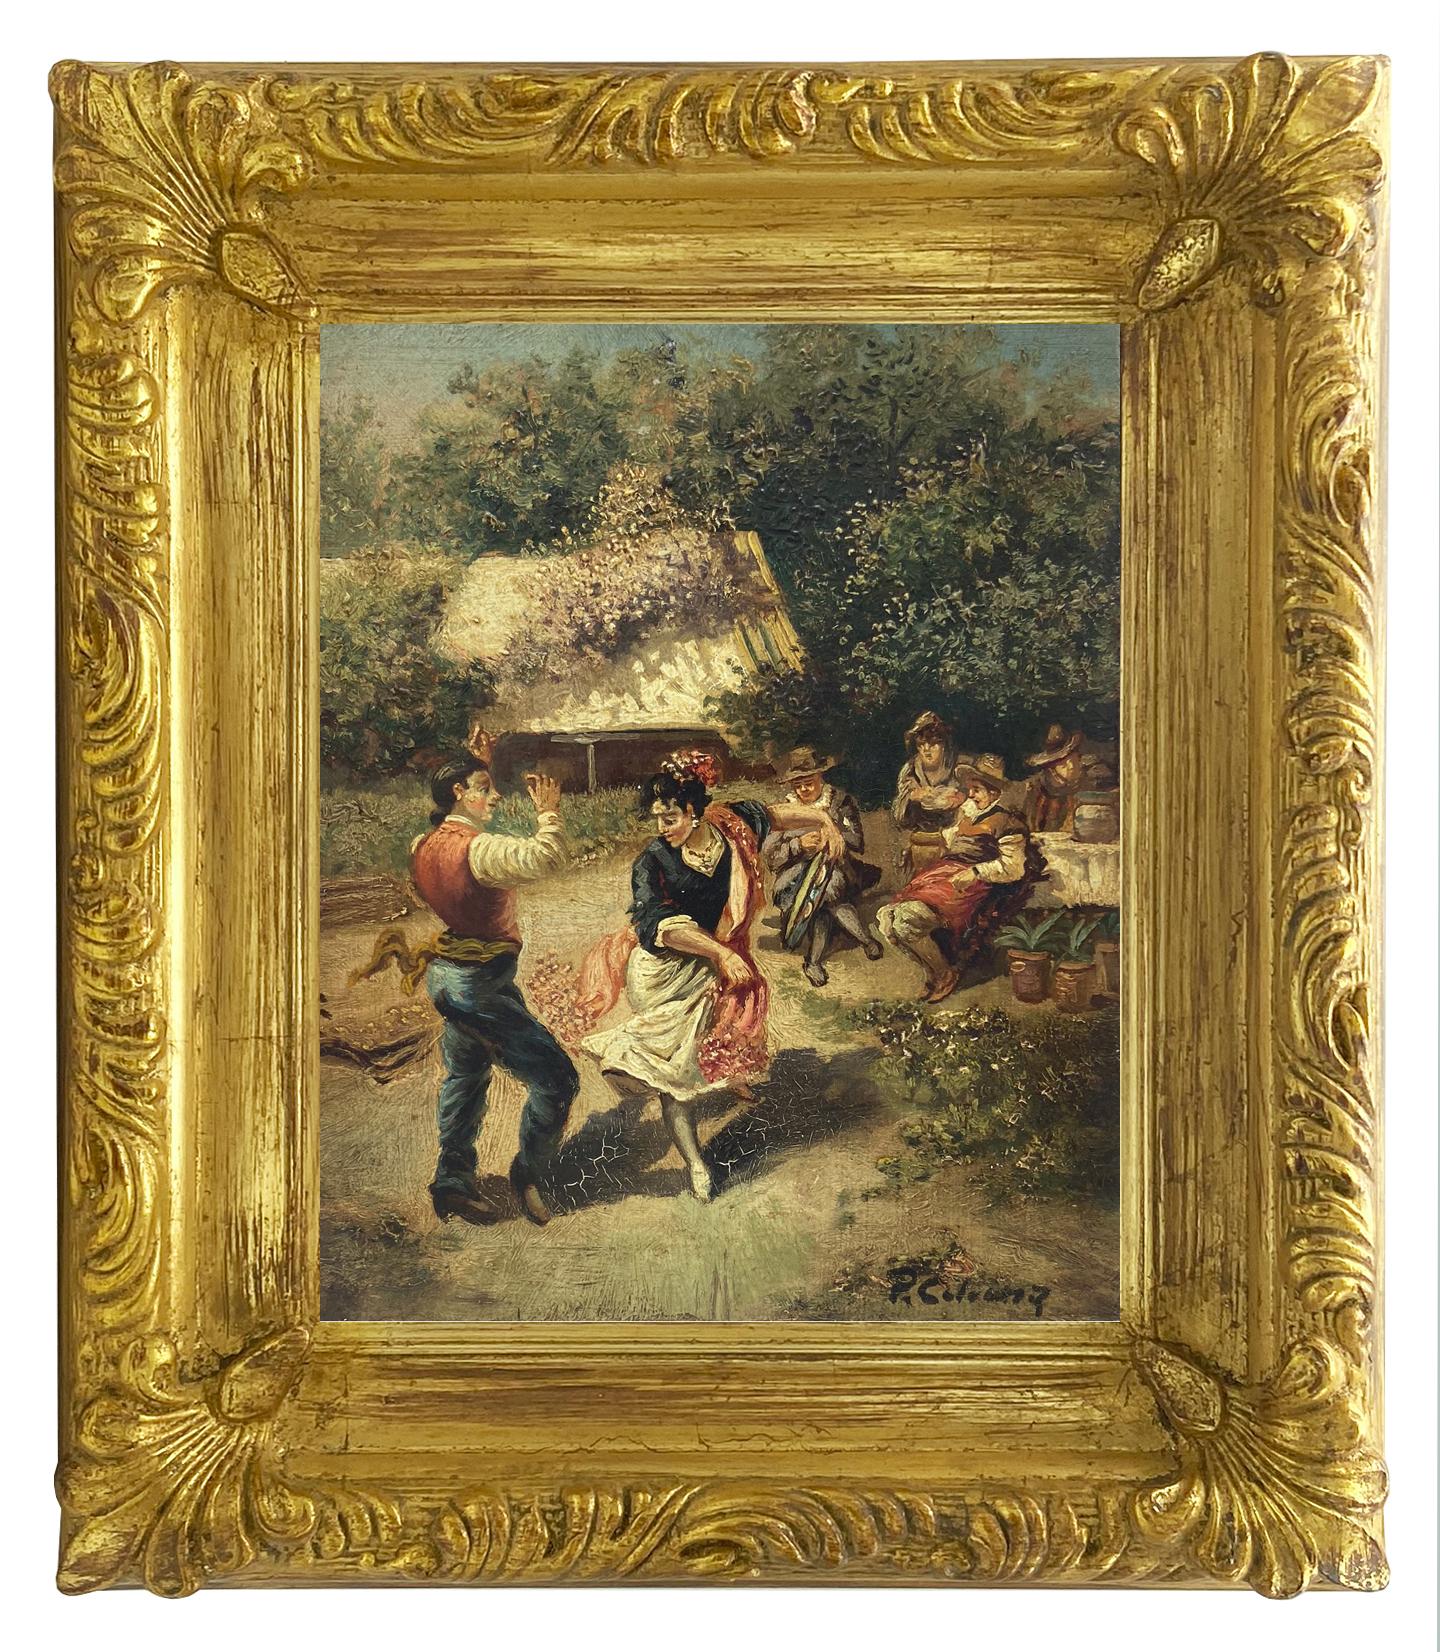 Pietro Colonna Figurative Painting - COUNTRY SCENE - Italian School - Italy - Oil on canvas painting